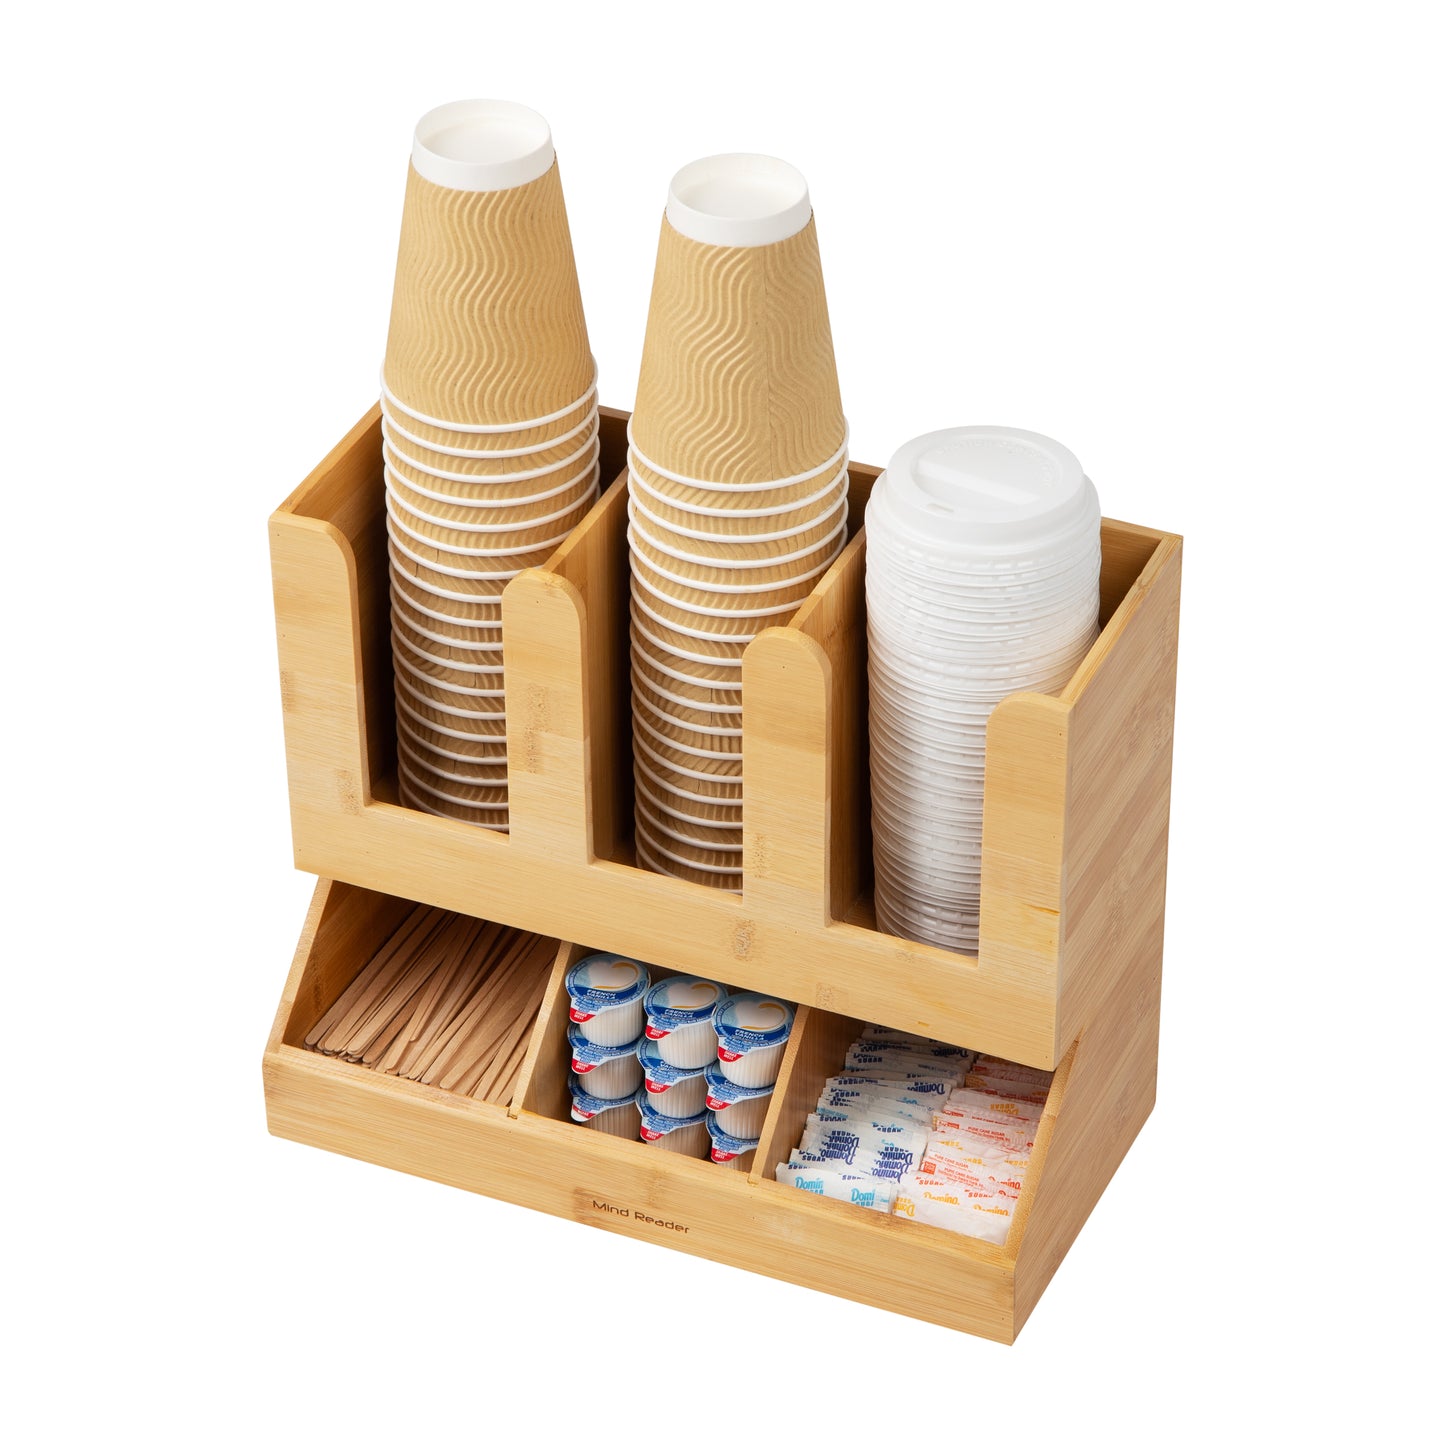 Mind Reader Cup and Condiment Station, Countertop Organizer, Coffee Bar, Kitchen, 13.625"L x 6.75"W x 11.75"H, Brown